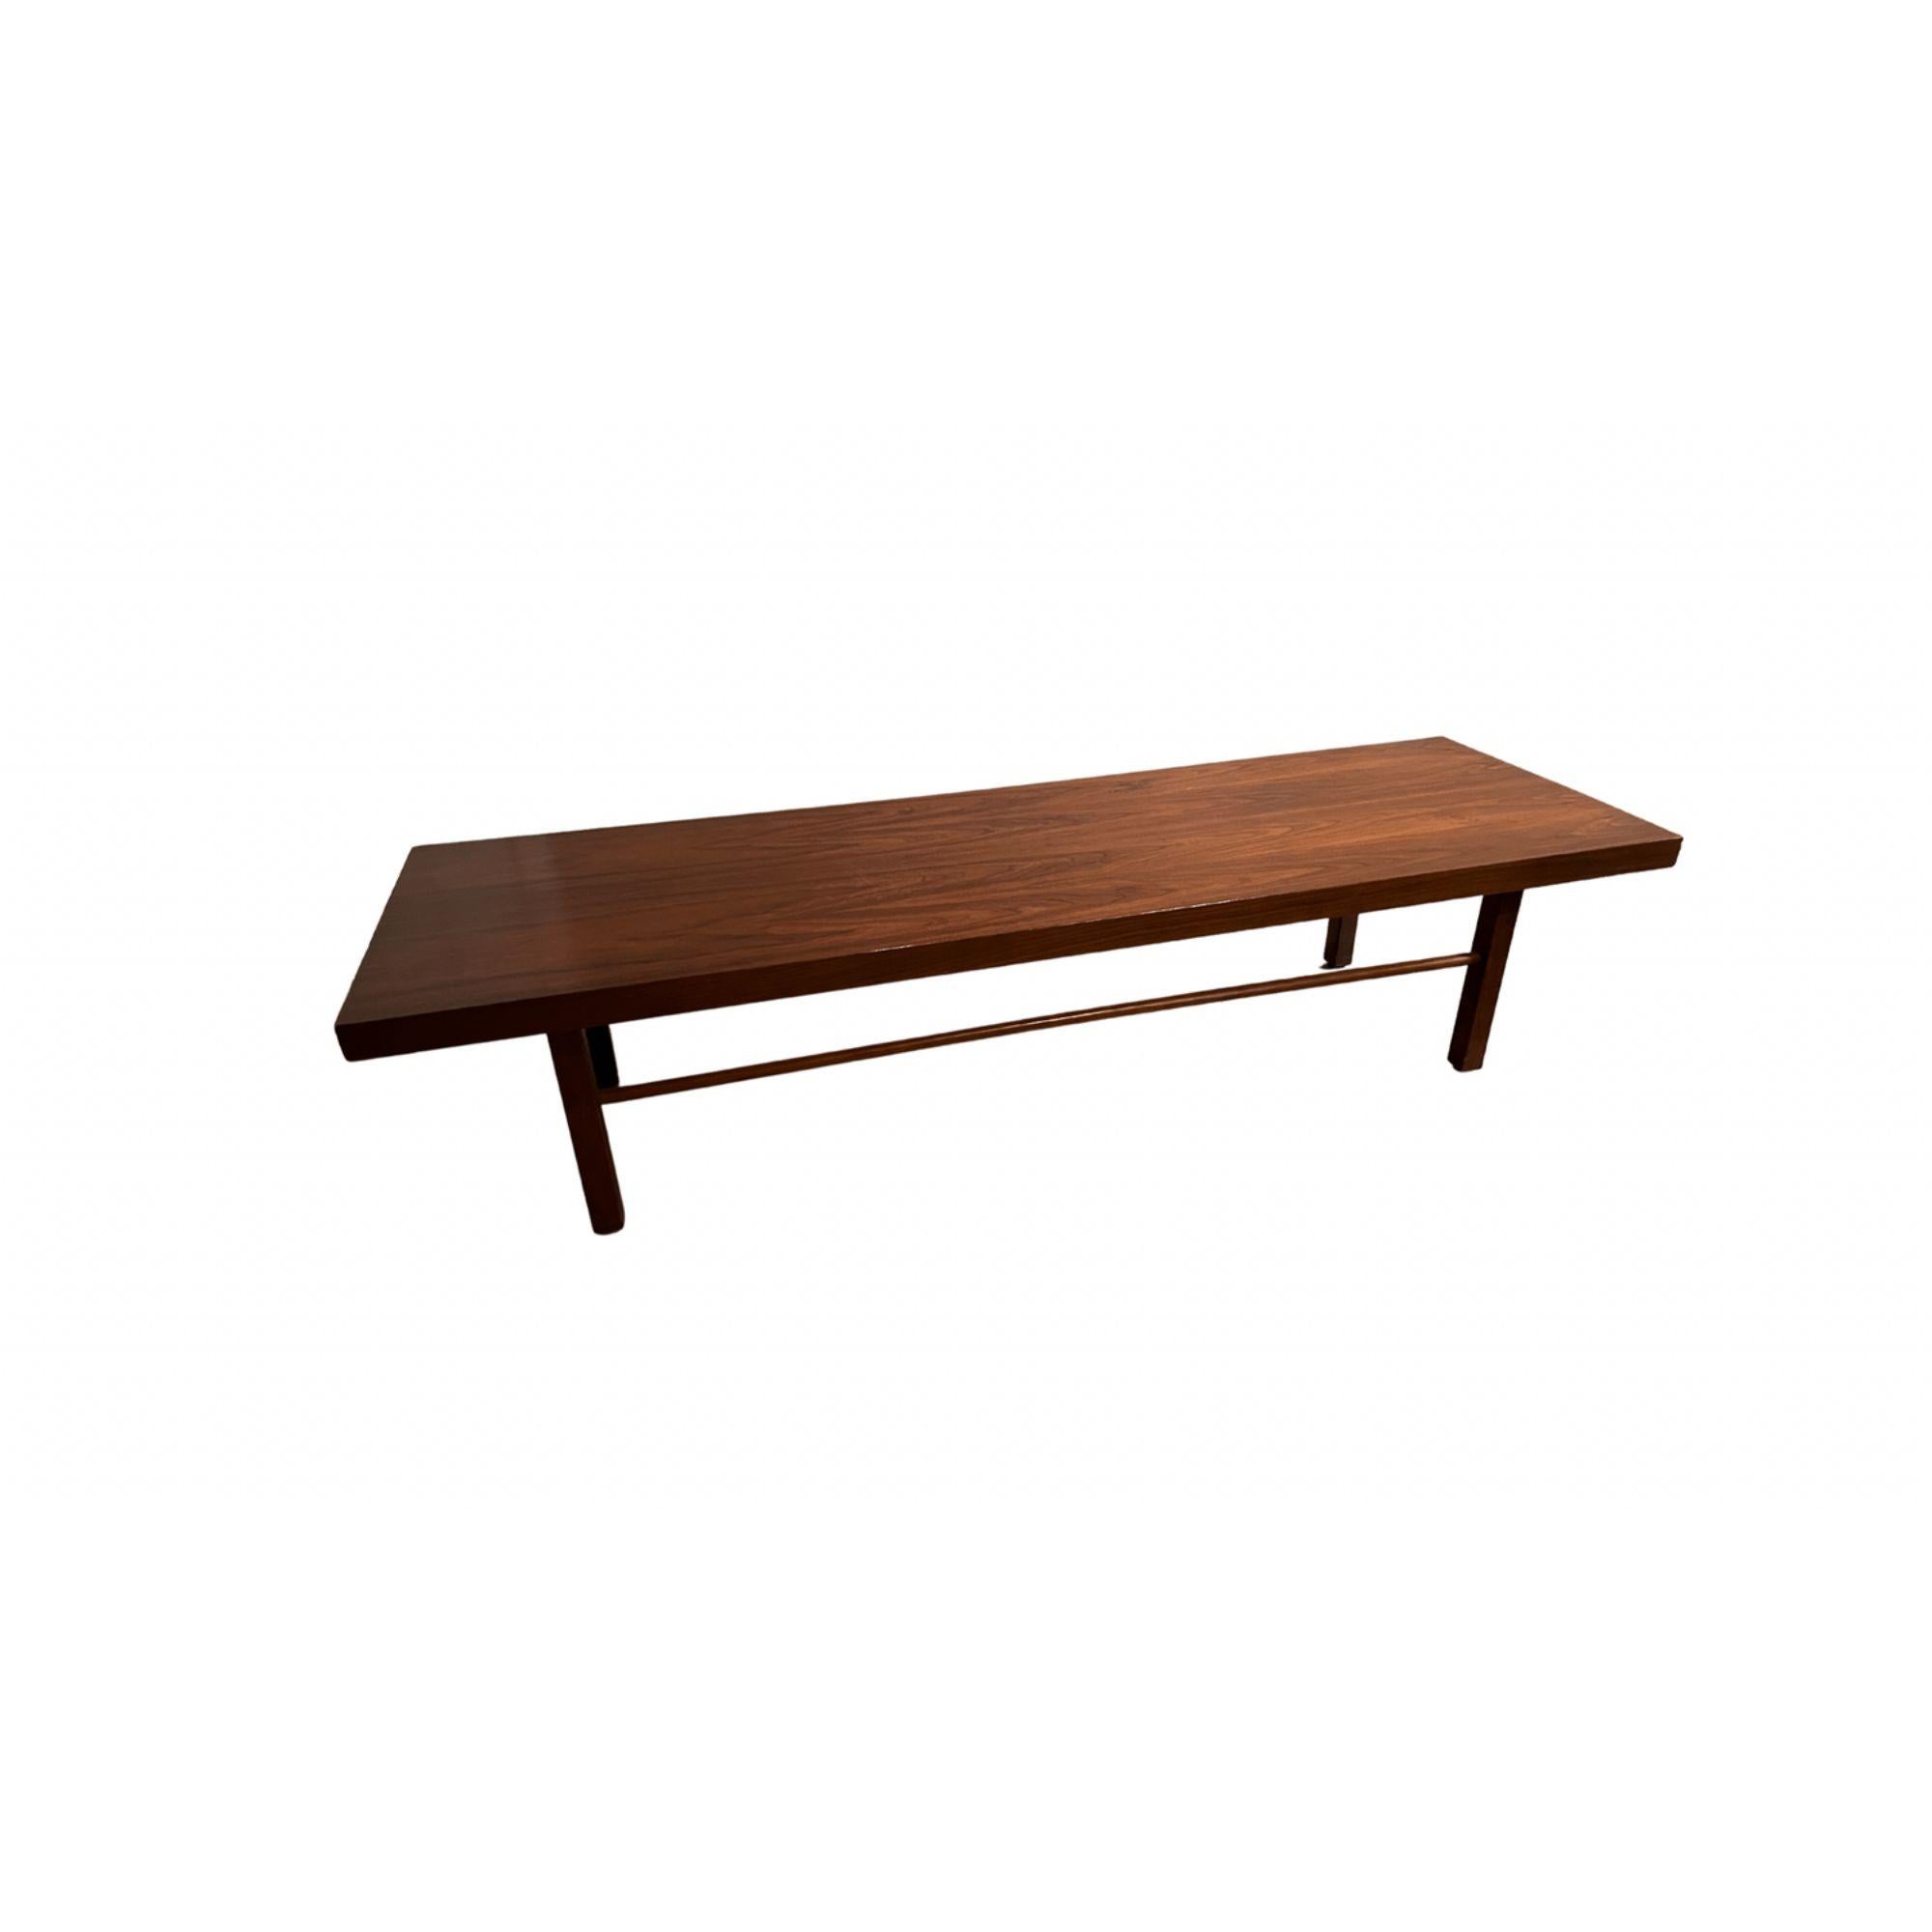 Mid-century walnut coffee table by Milo Baughman for Thayer Coggin, 1960's.

Additional Information:
Materials: Walnut
Color: Brown
Style: Mid-Century Modern
Table Shape: Rectangle
Designer: Milo Baughman
Period: 1960s
Place of Origin: